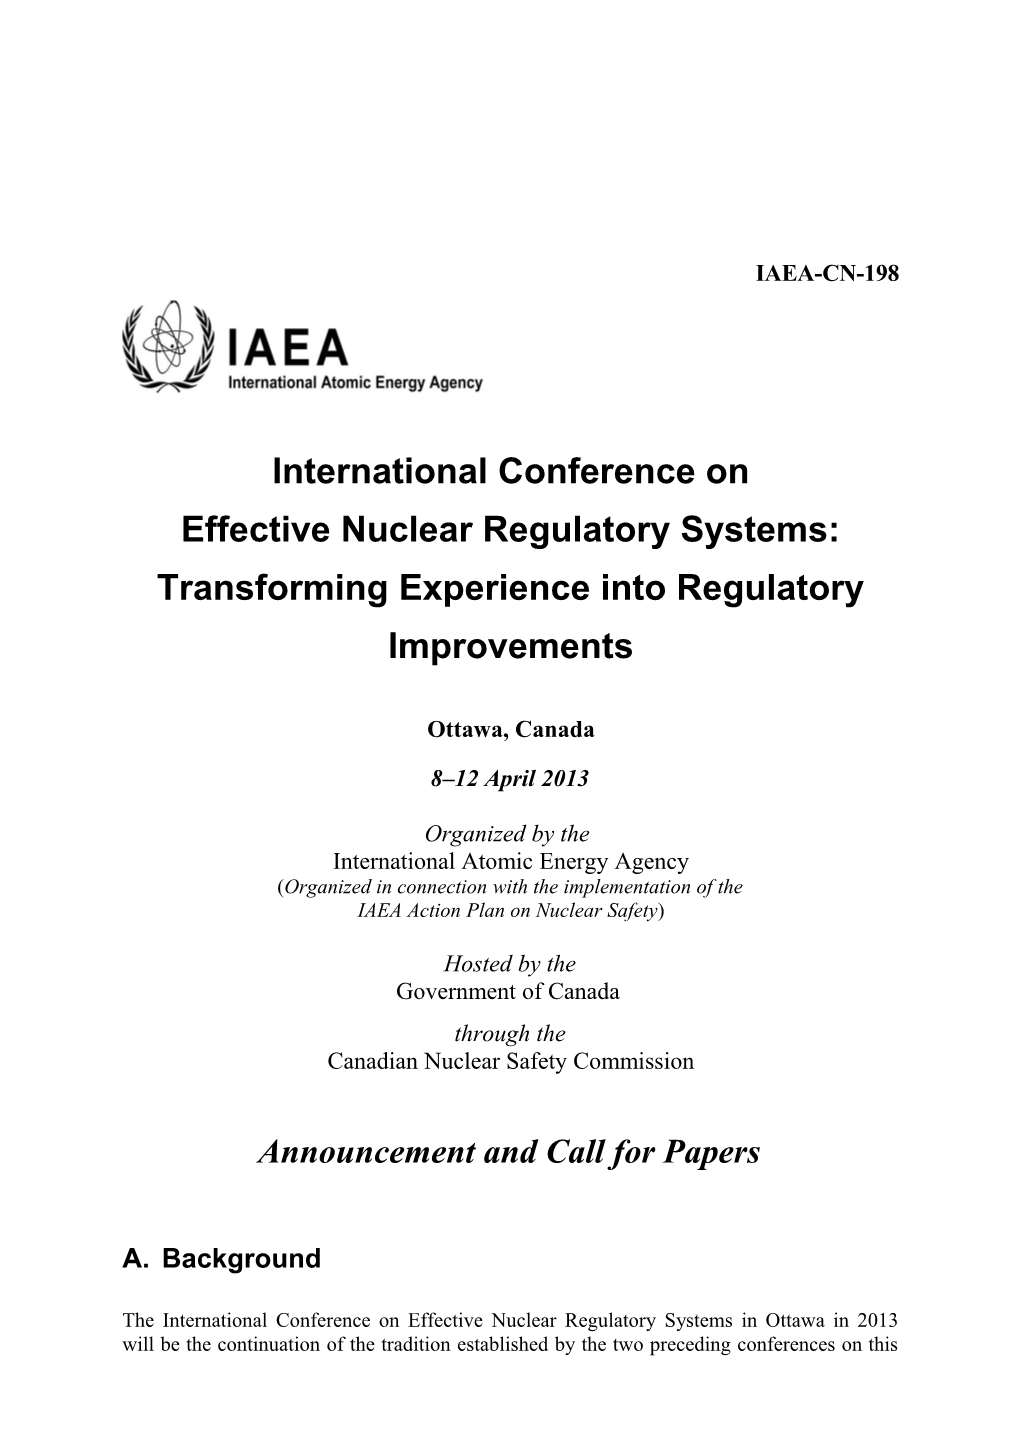 Effective Nuclear Regulatory Systems